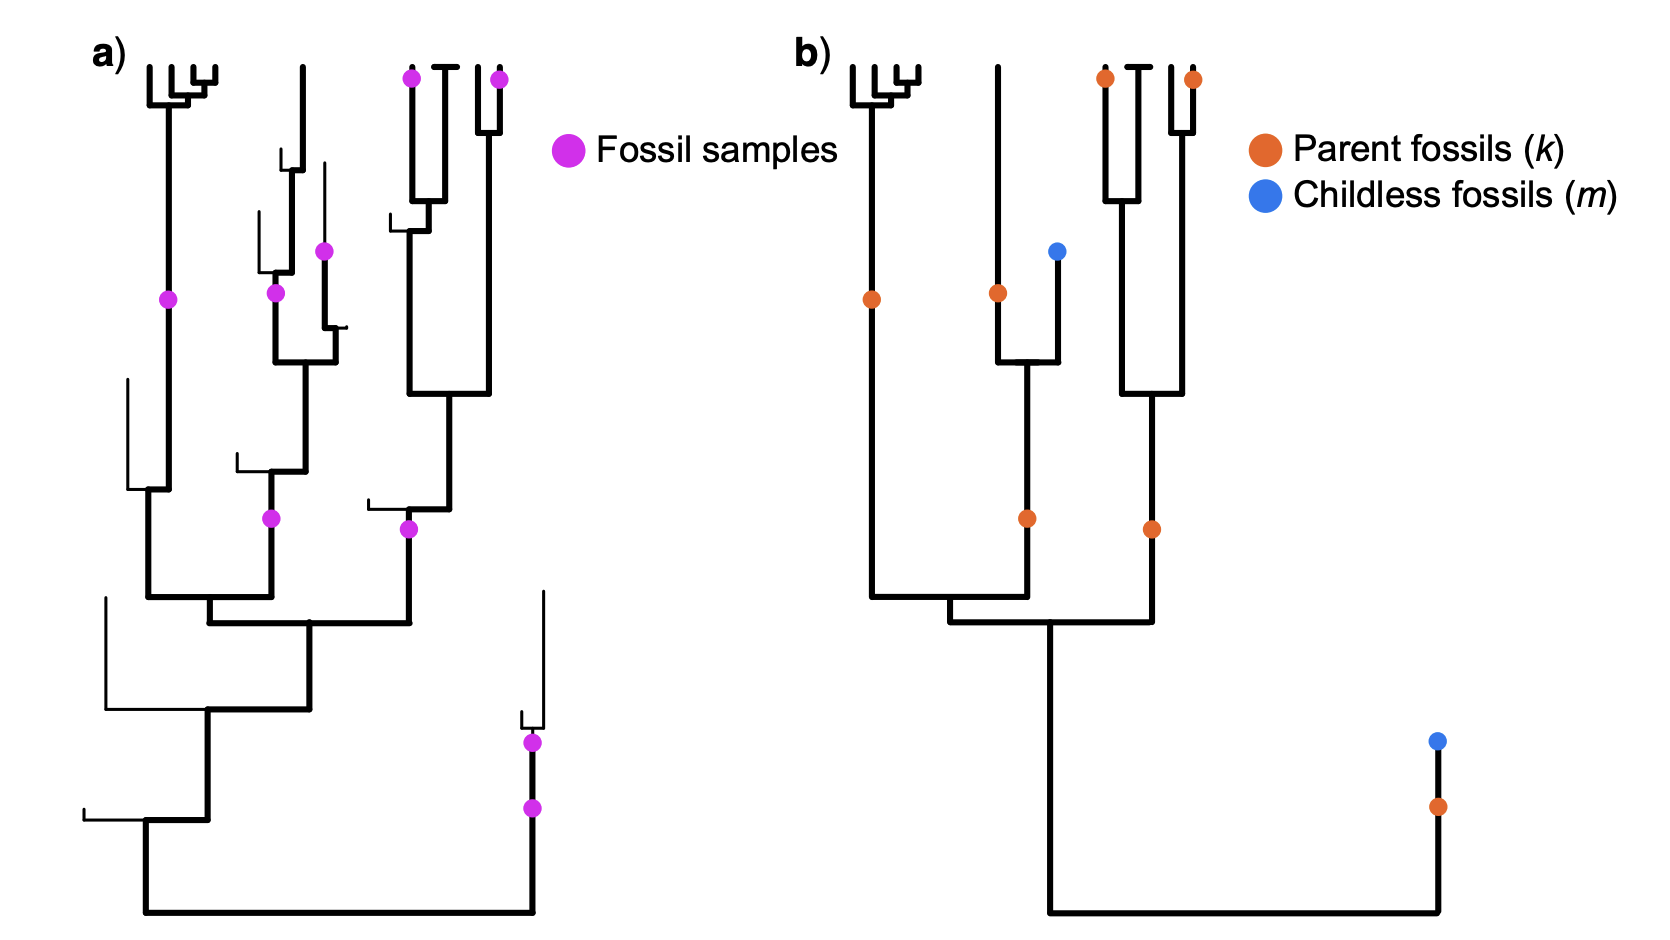 Figure 1 from Beaulieu and O'Meara (2022), showing the distribution of fossils on two trees. The left tree shows the sampled fossils; the right plot shows the distinction between parent fossils (ones that have a descendant sample, either a fossil or a tip) and childless fossils (terminal fossils).